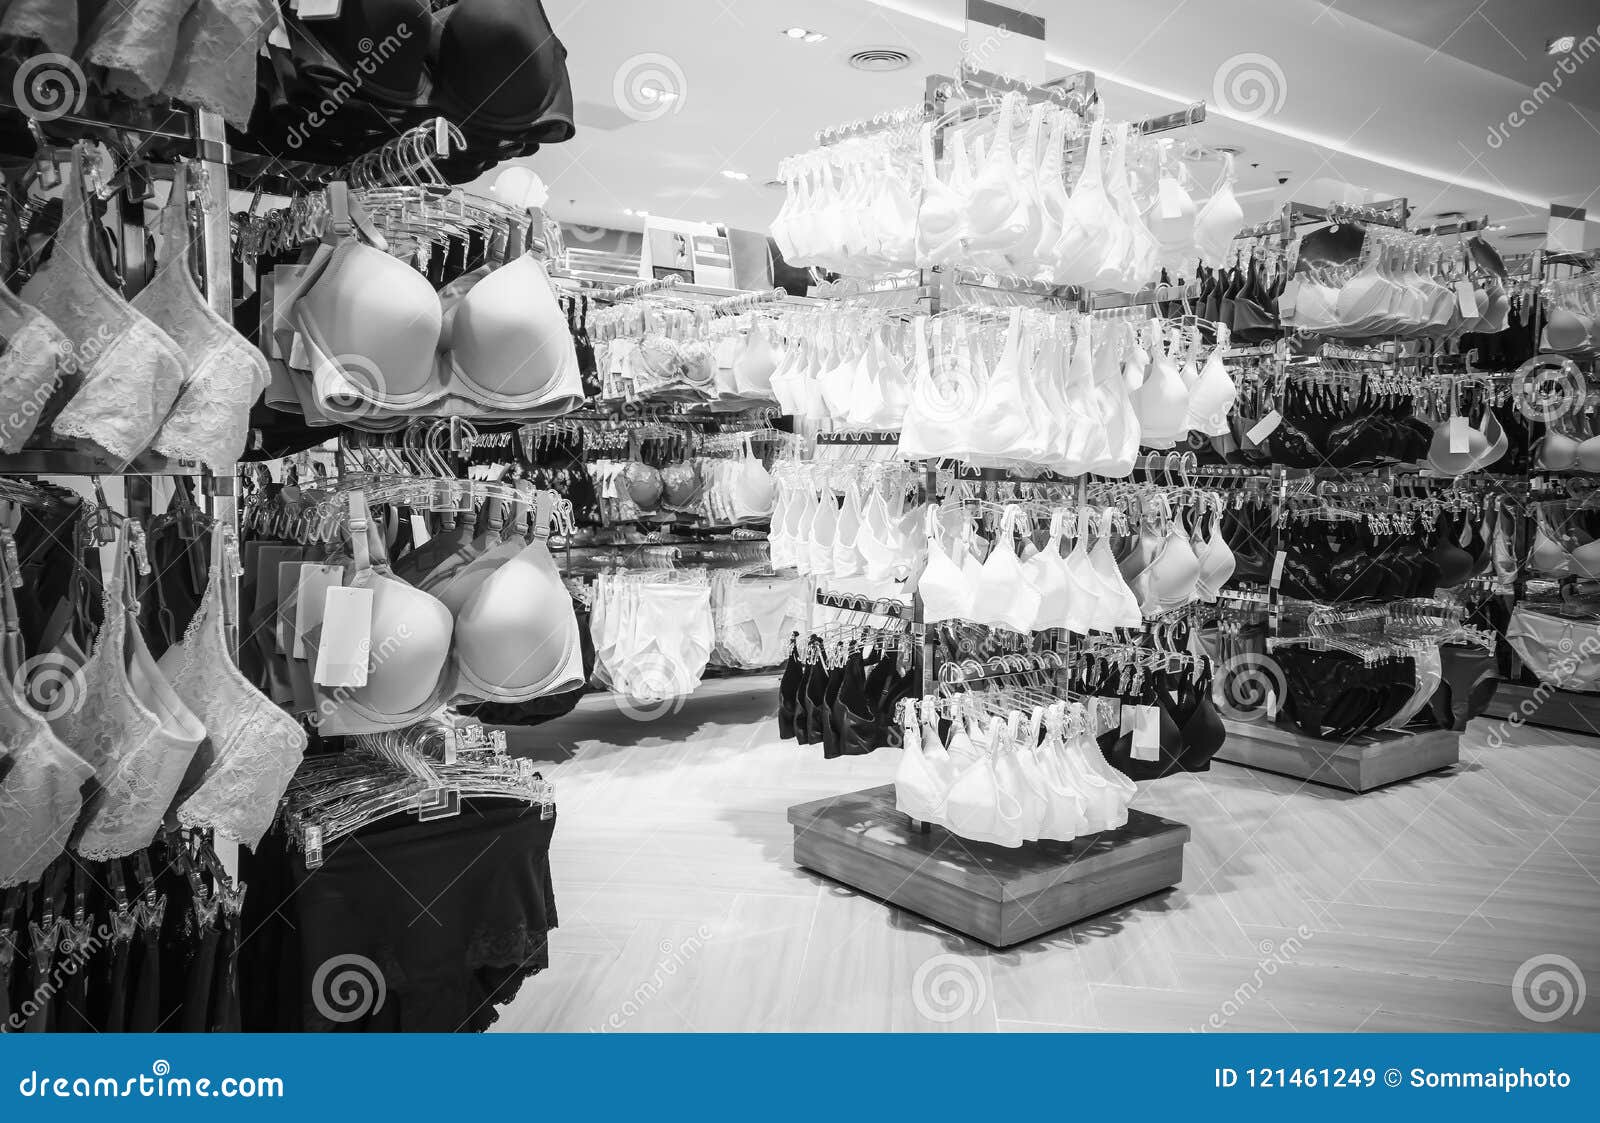 Lingerie at Shop Woman Underwear Clothes in the Shopping Mall Stock Photo -  Image of mall, dress: 204786094